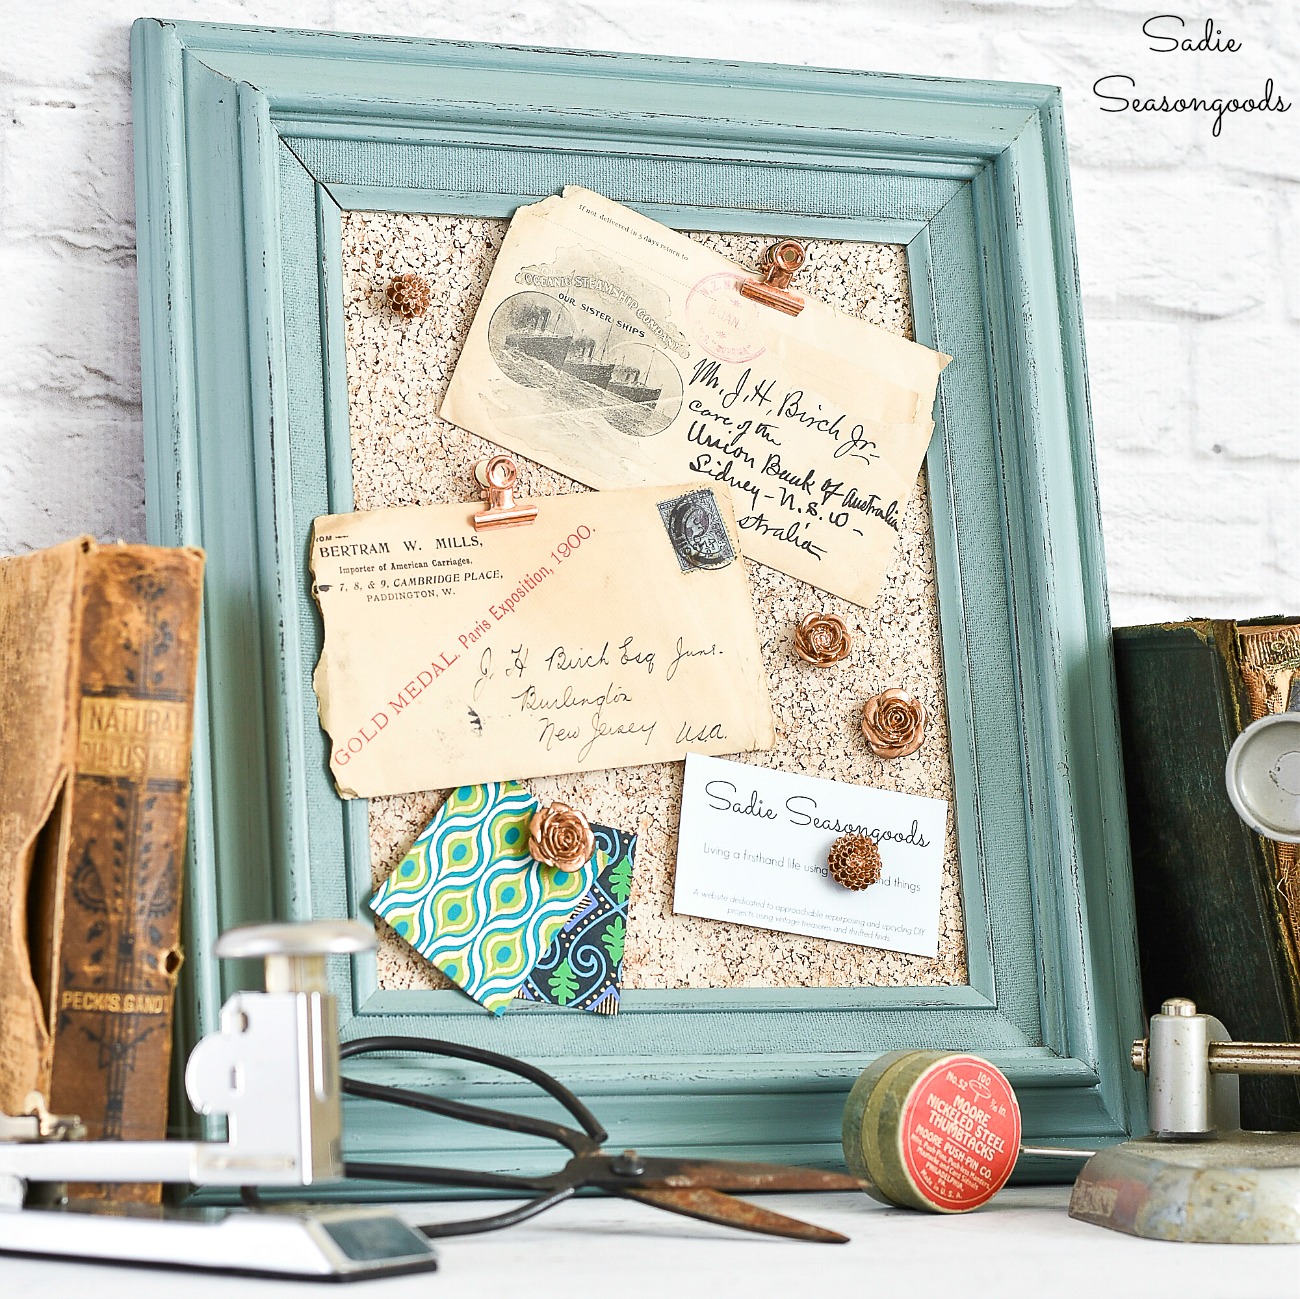 Framed cork board or DIY cork board by upcycling a picture frame into cute office decor